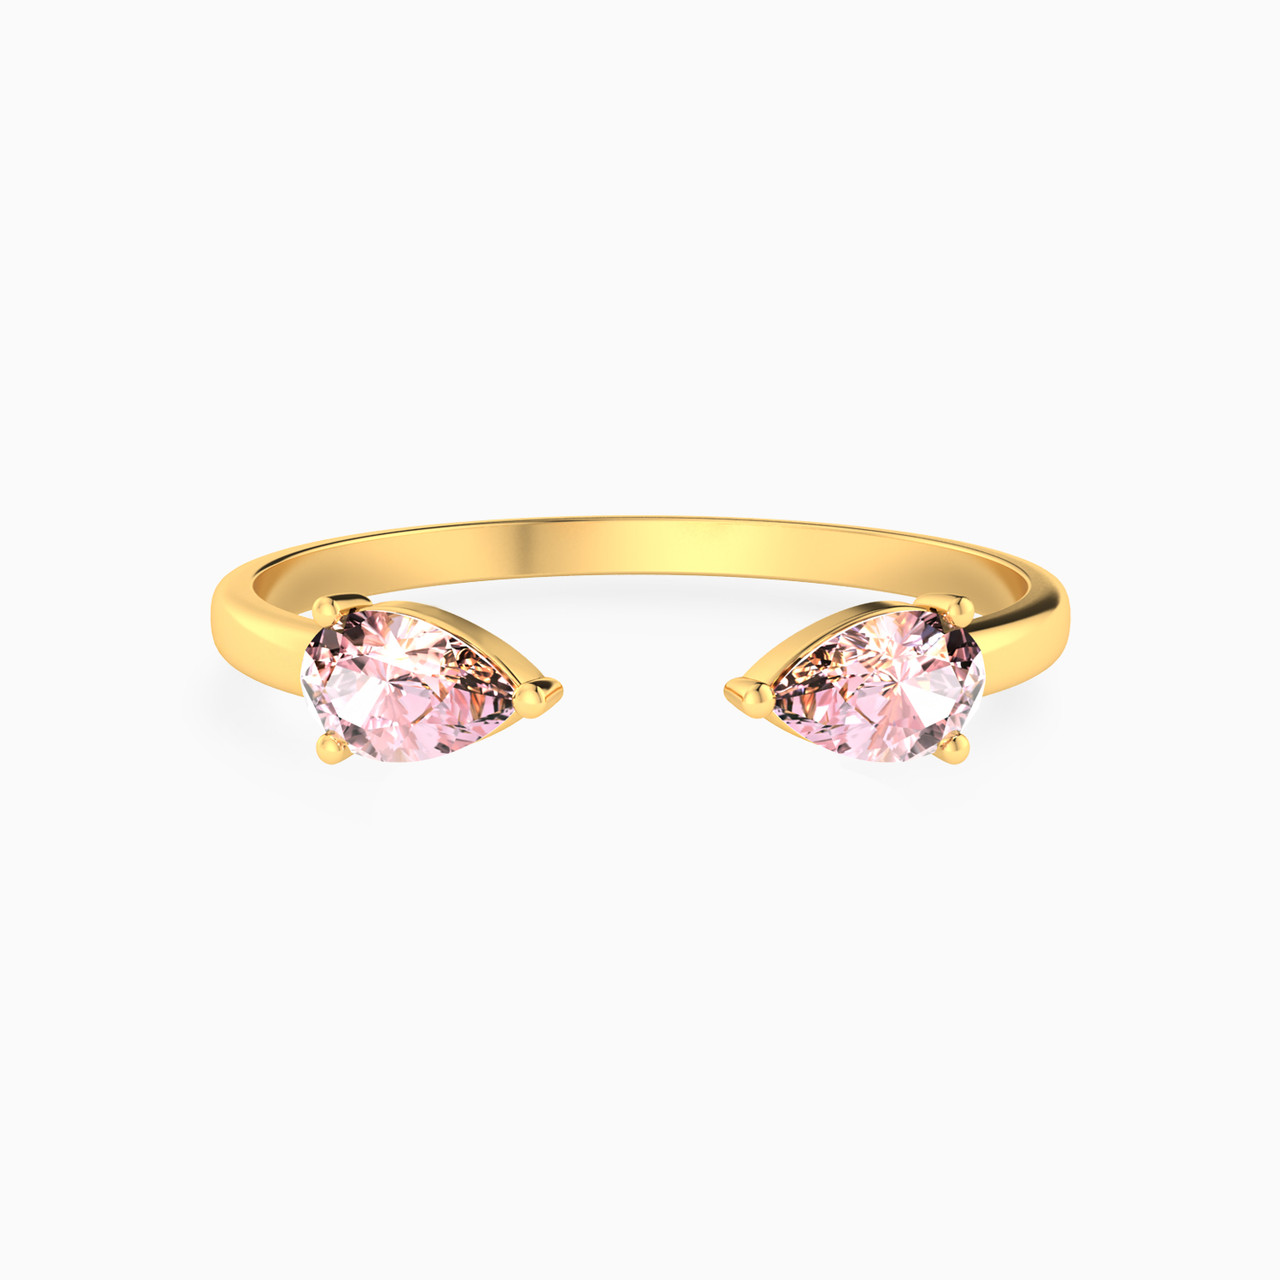 Teardrop Shaped Colored Stones Two-Headed Ring in 14K Gold